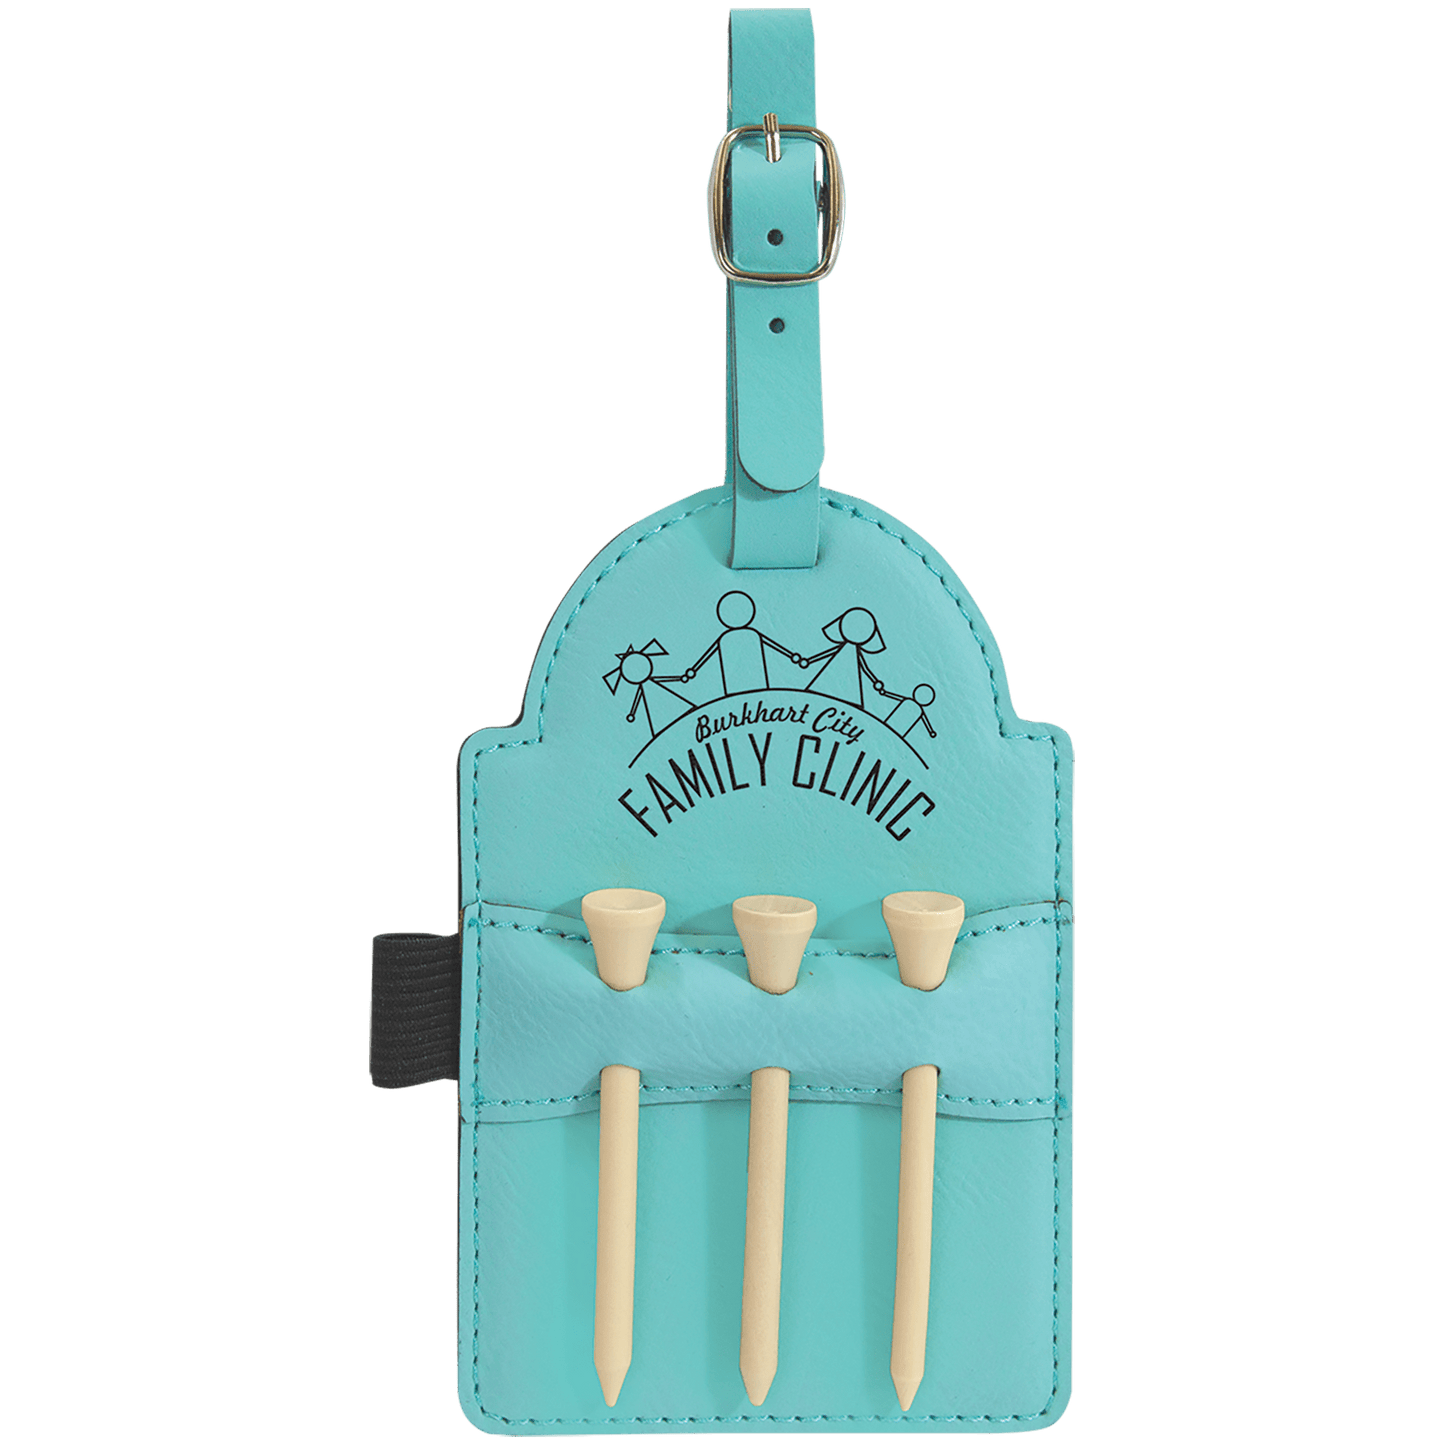 Golf Bag Custom Tag with Wooden Tees Included | Father's Day Gifts | Golf Gifts | Gifts for Him | Personalized Gifts